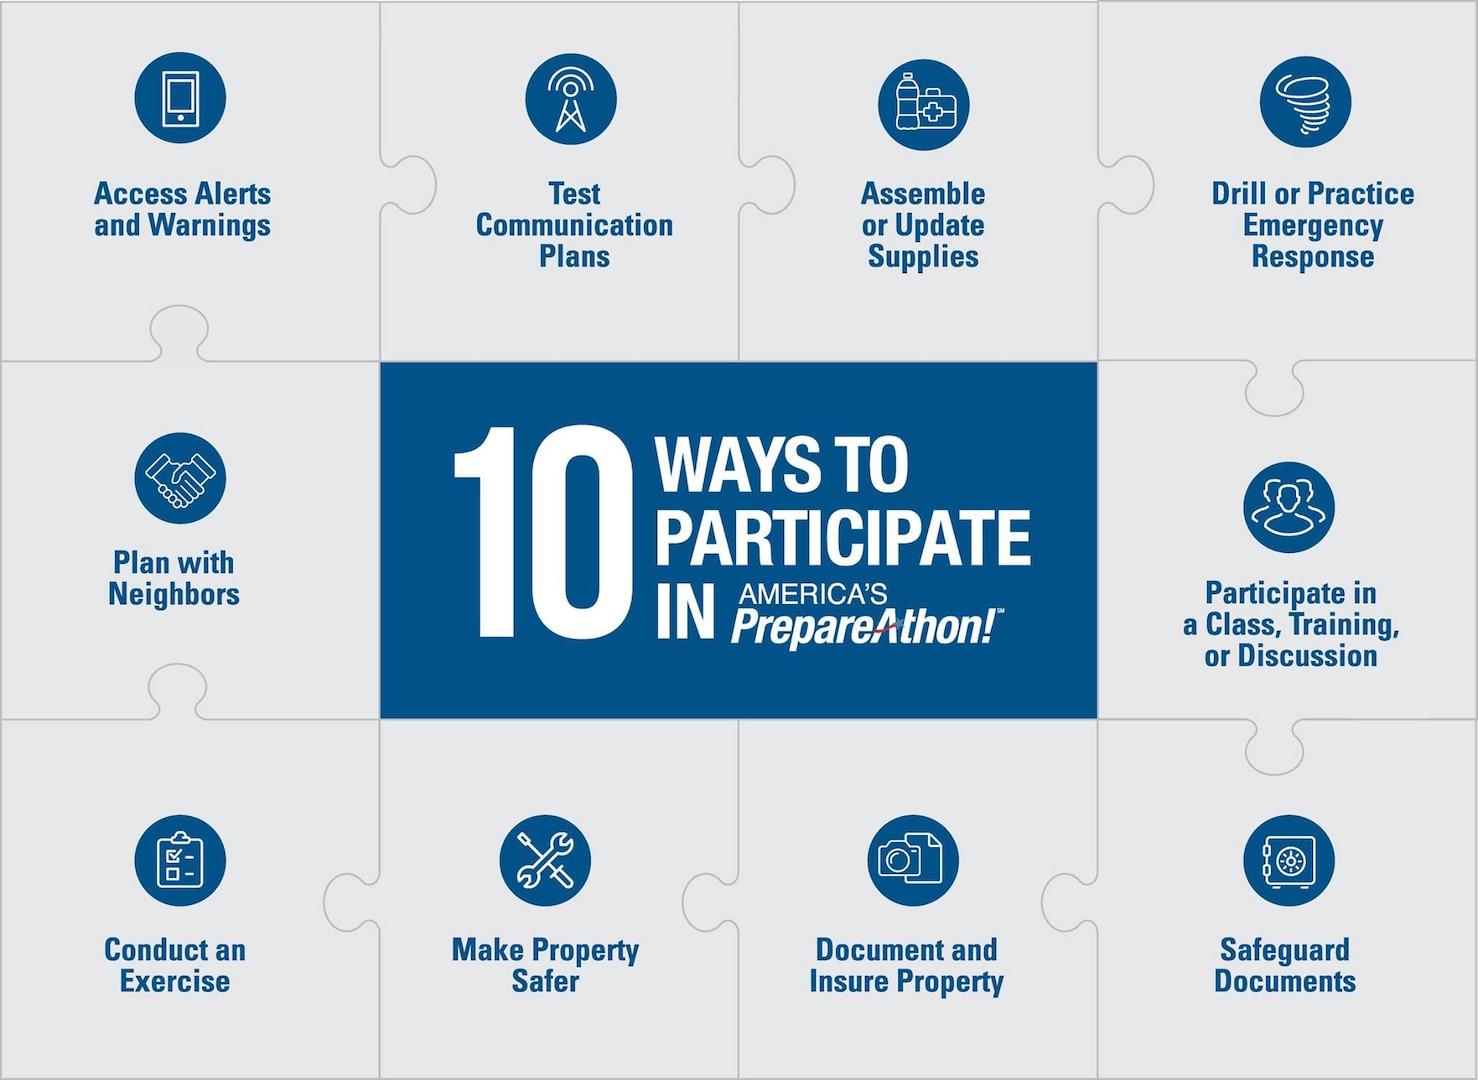 Signing up for local emergency alerts and warnings is one of the 10 ways to prepare for an emergency during America’s PrepareAthon! The FEMA campaign serves as the culmination of September’s National Preparedness Month.